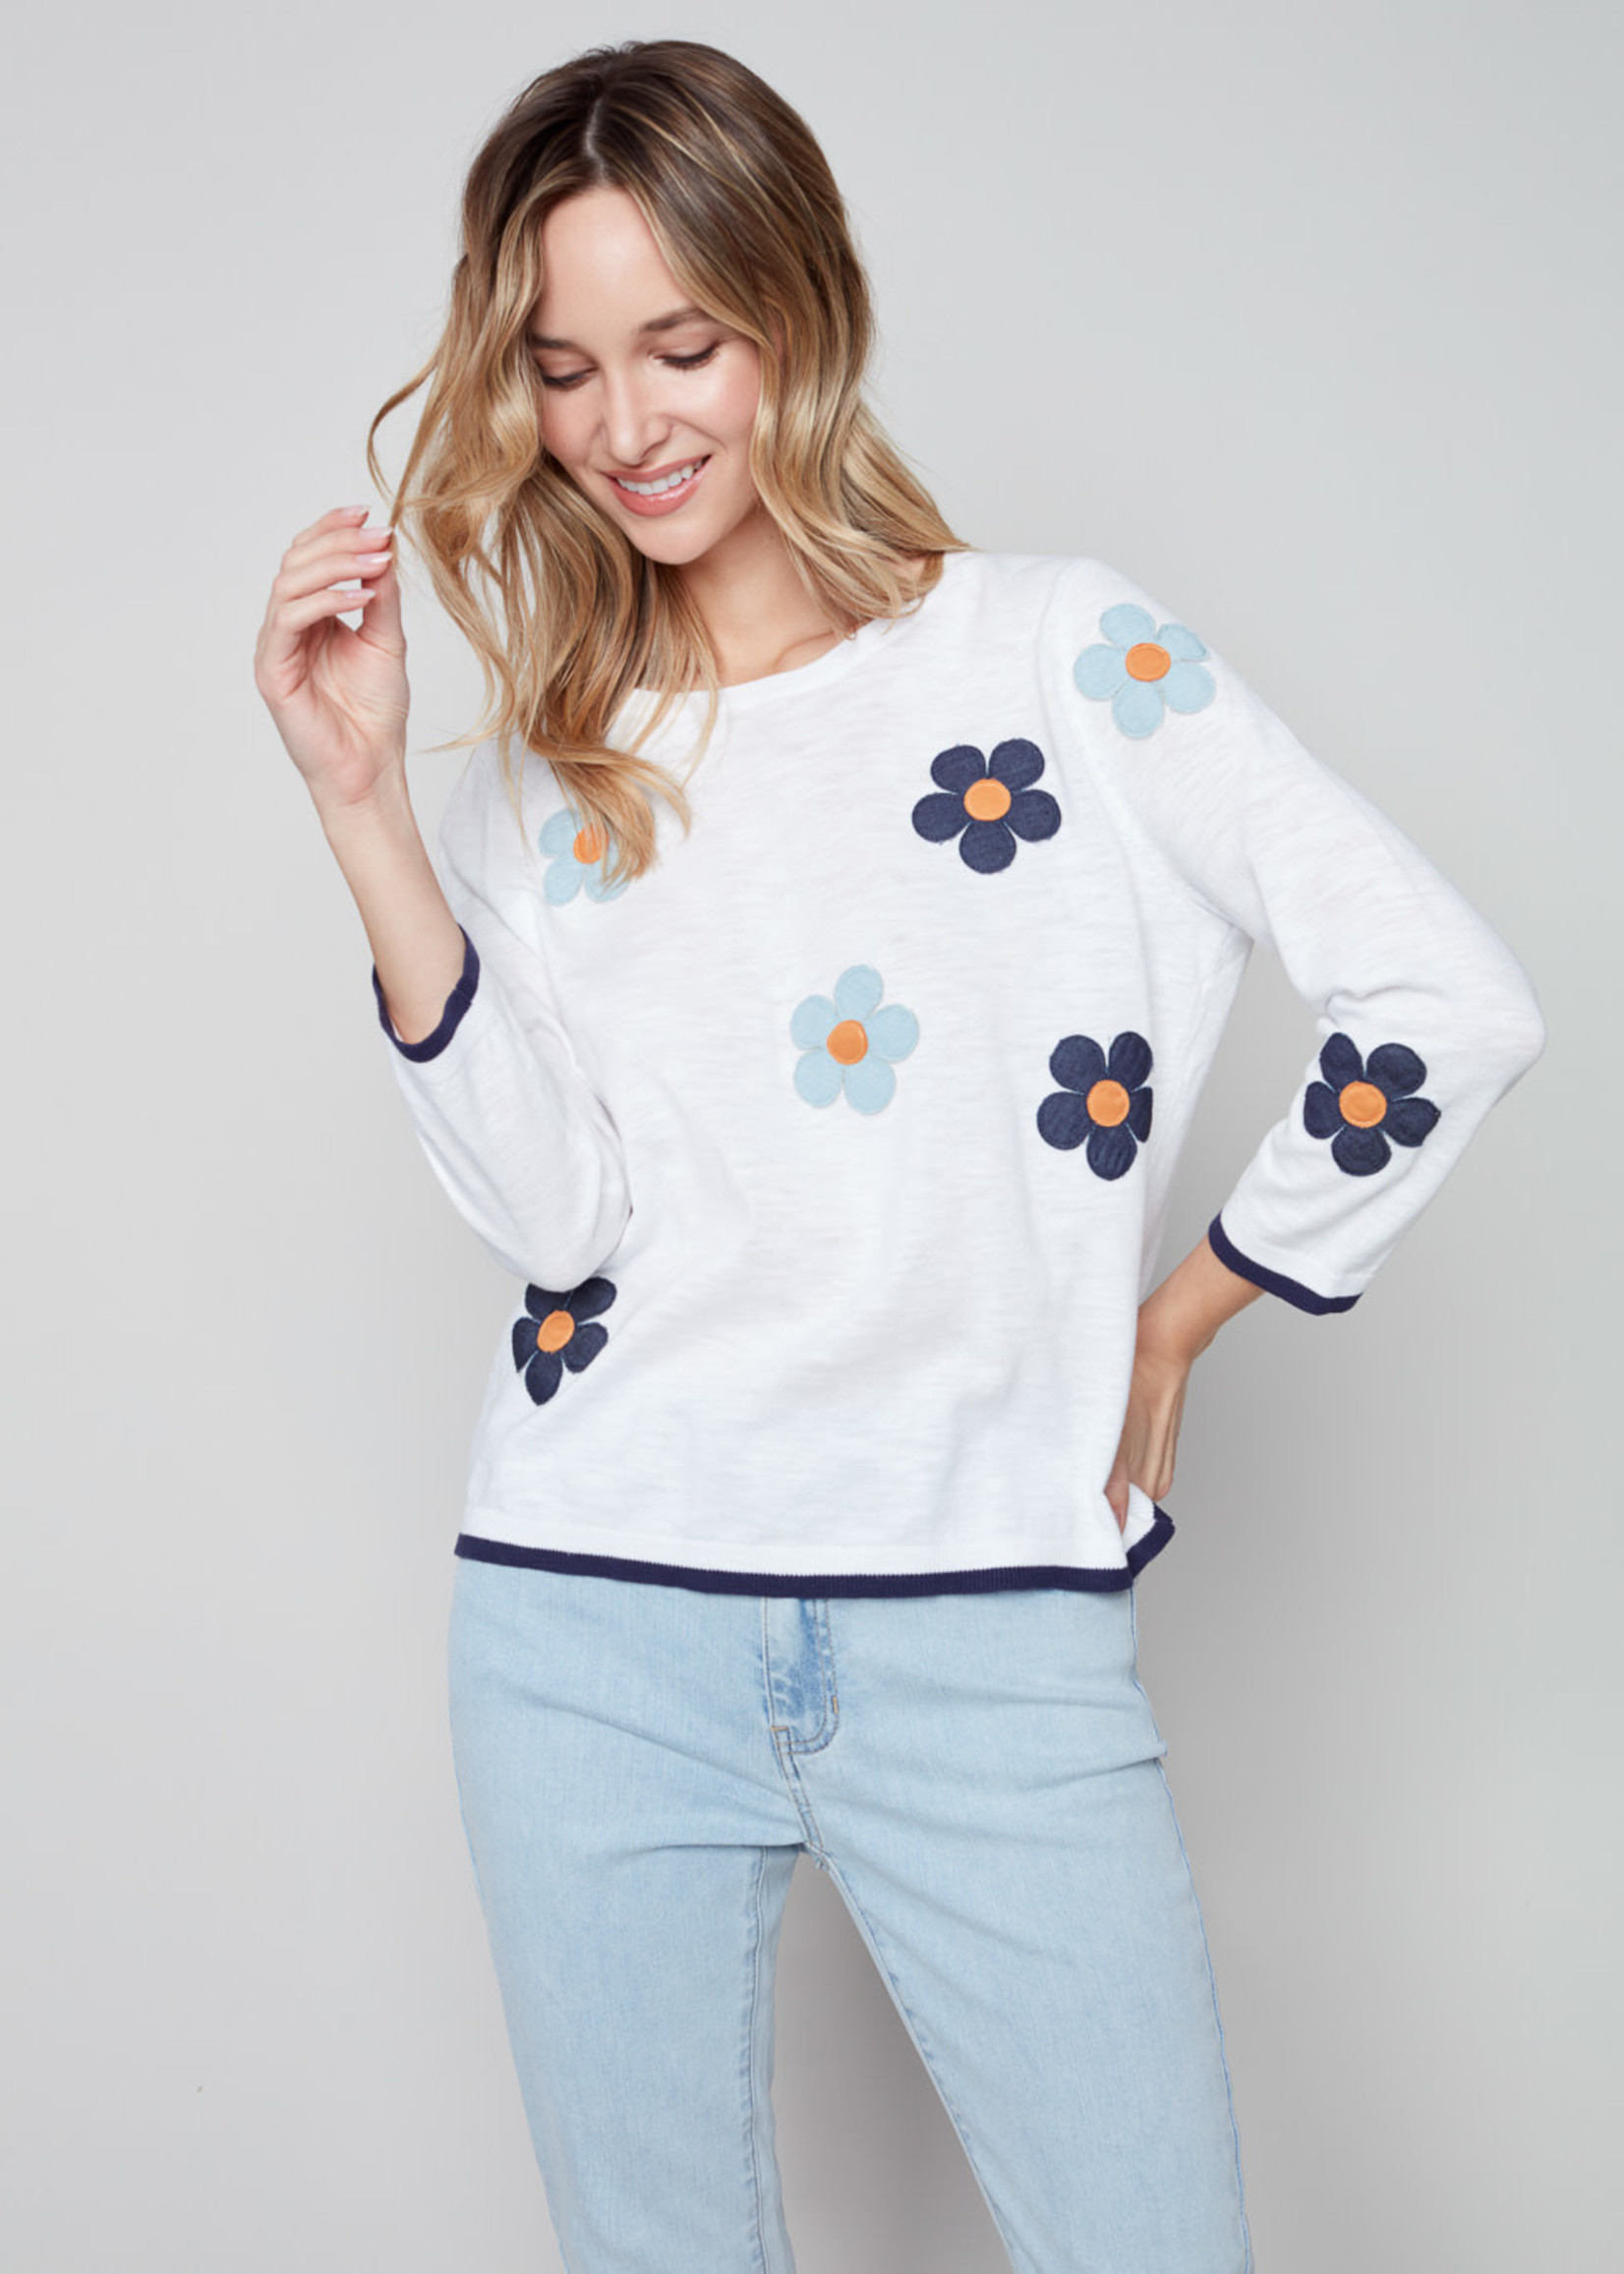 Charlie B Daisies Patch Sweater